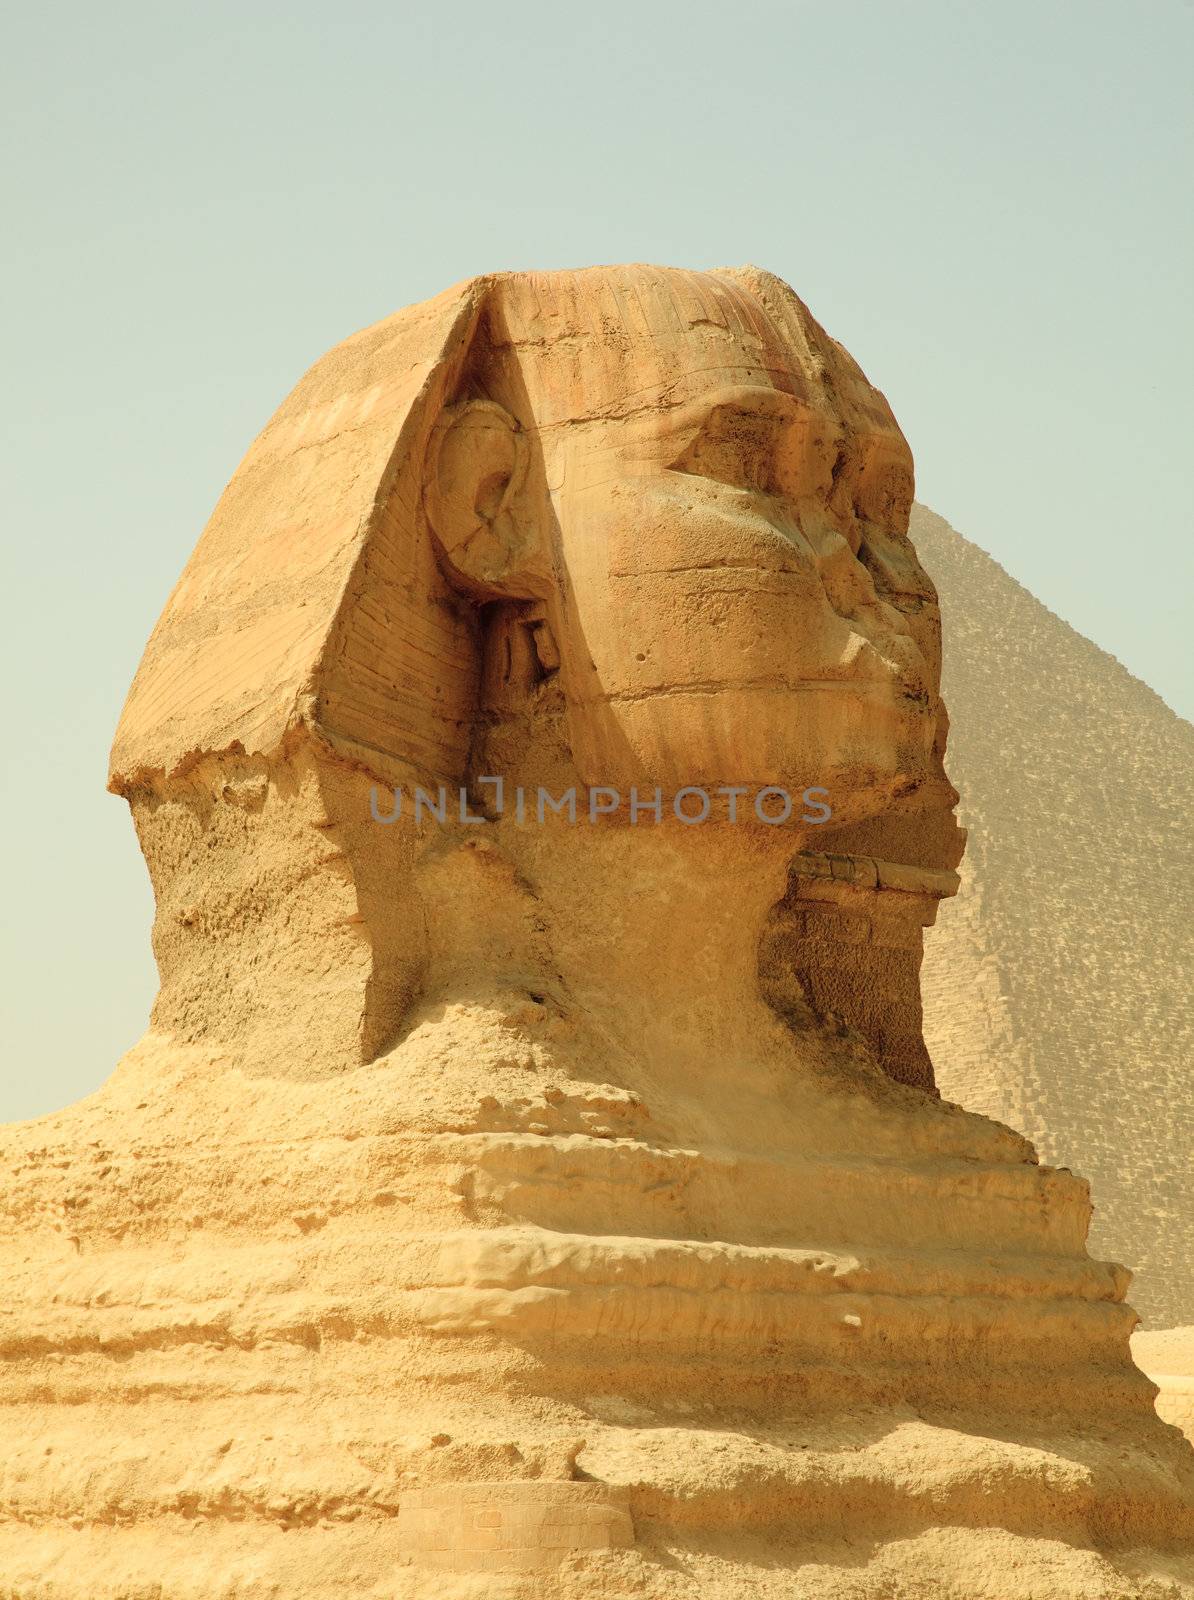 Sphinx and Giza Pyramids in Egypt by steheap